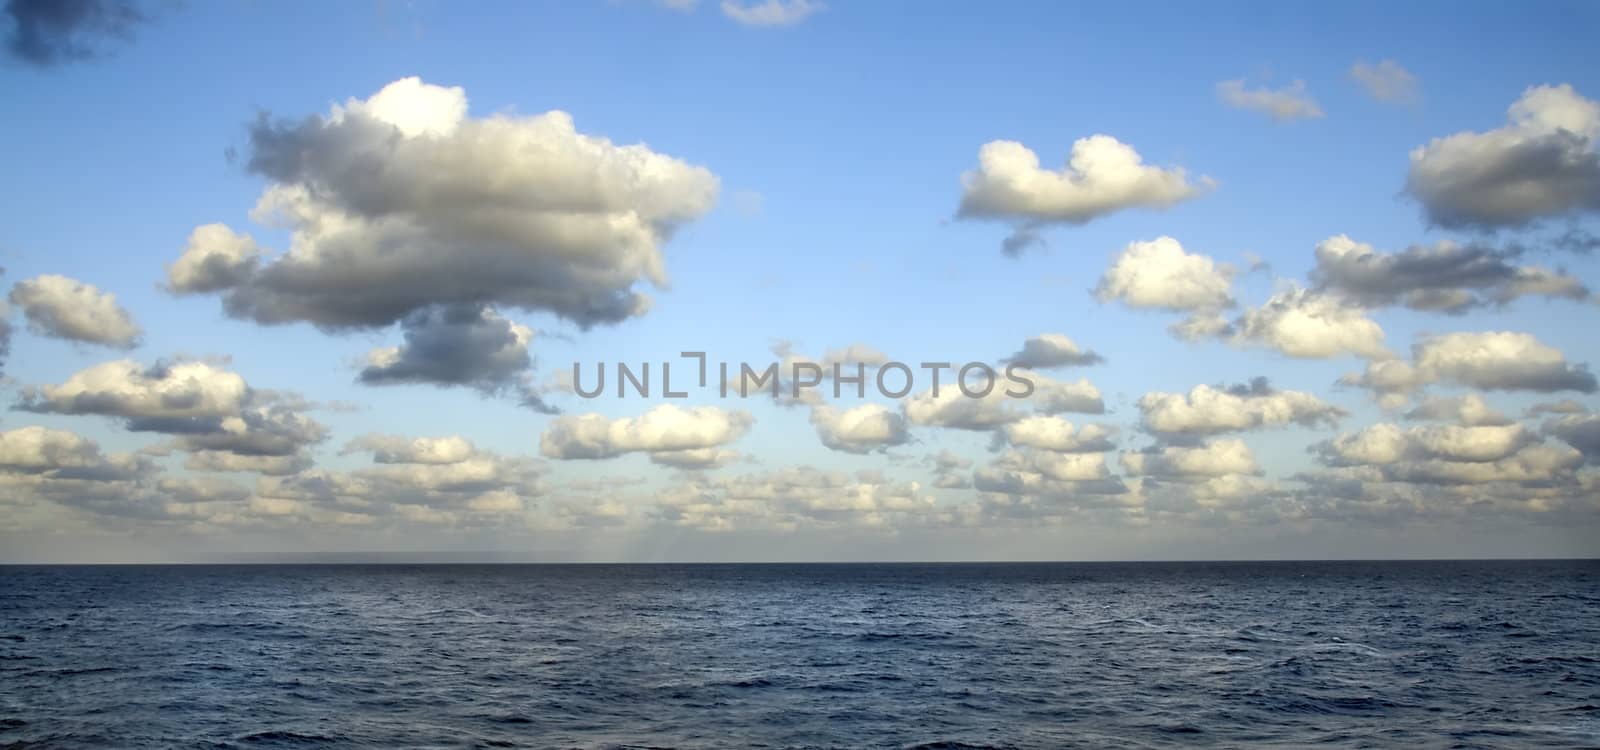 A blue sea with a sky full of white clouds